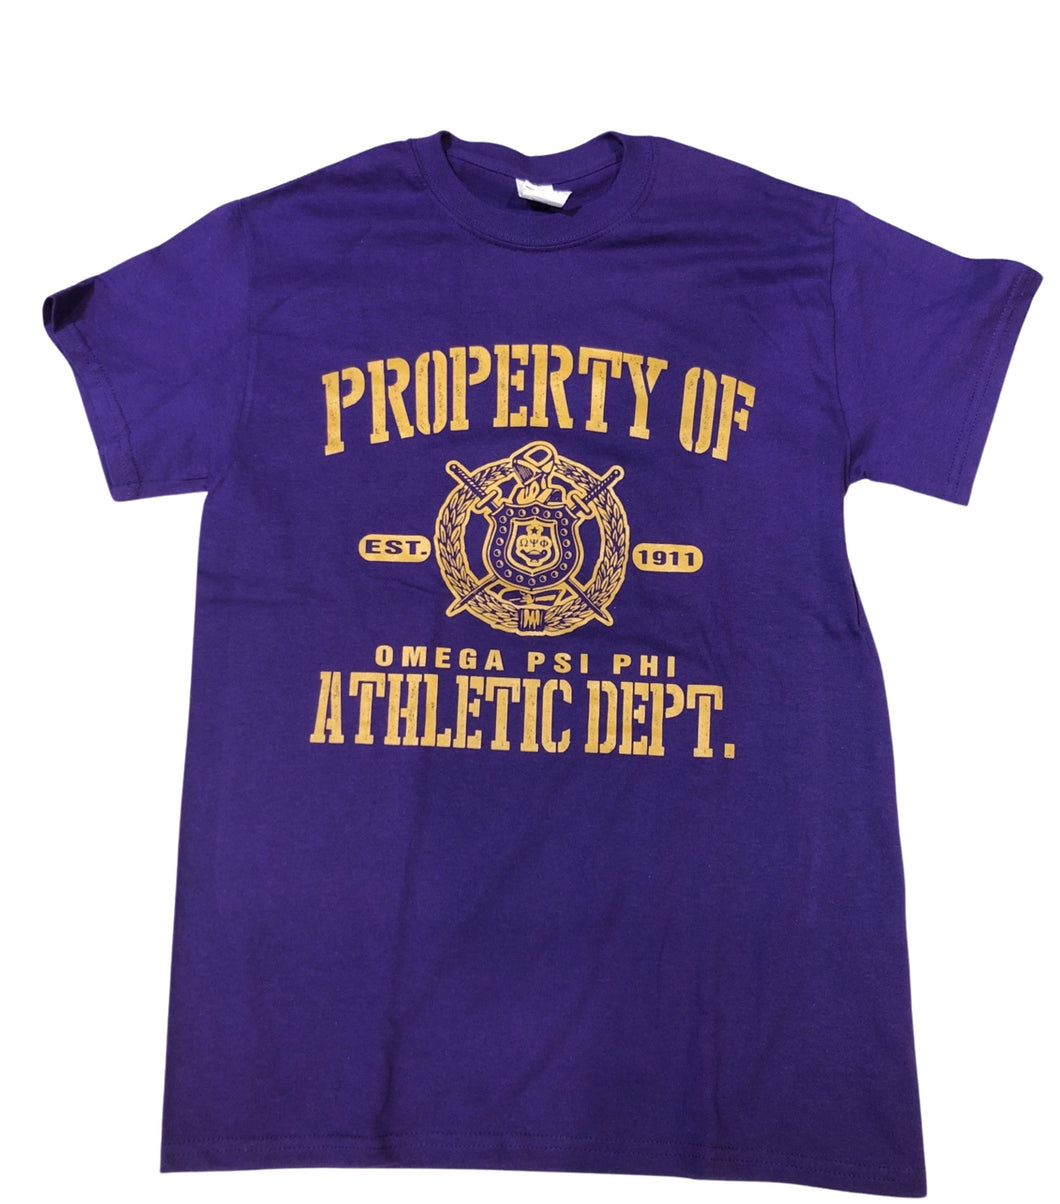 Omega Psi Phi Property of Athletic Department Graphic Tee *Sale Tee*